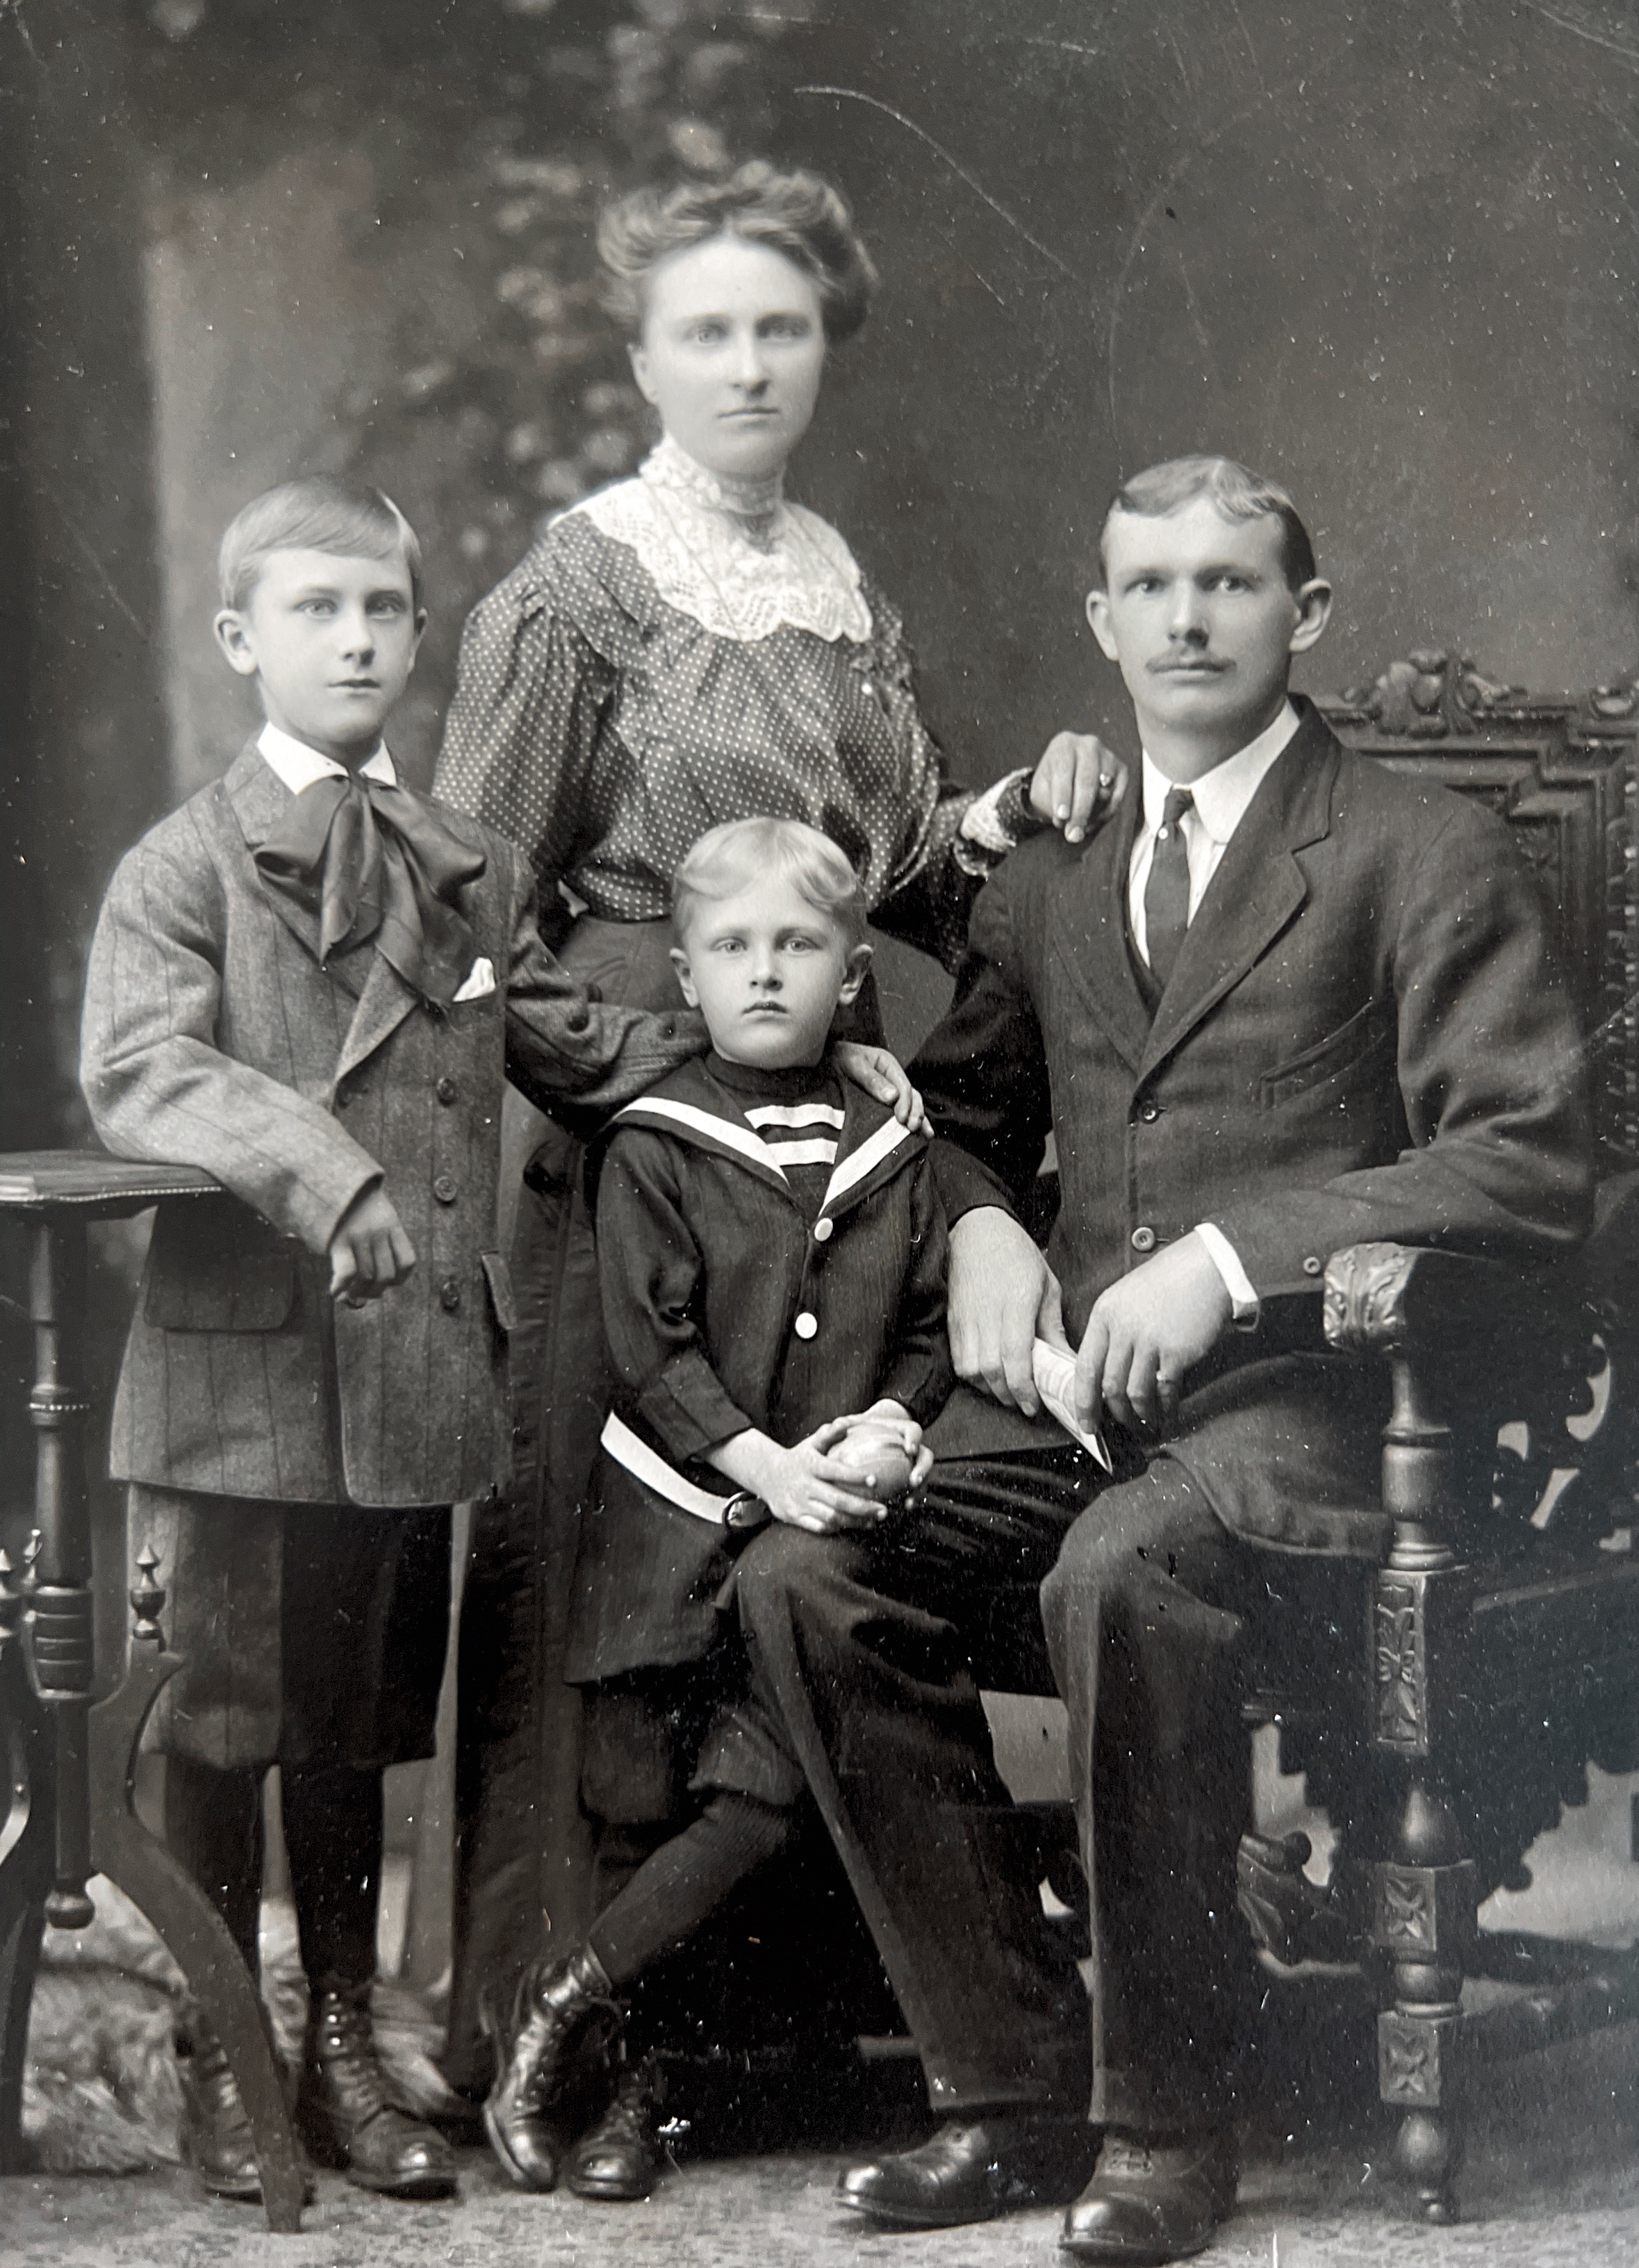 Louise (Svoboda) and Sigmond Mussgnug Sr.,
and their oldest two sons:
Sigmond Joseph, Jr. (1903-1978) and Louis 
Photo taken around 1910 or 1911

Susan Pelcher Prigge’s Maternal Great Grandparents with her Grandfather, Sigmond